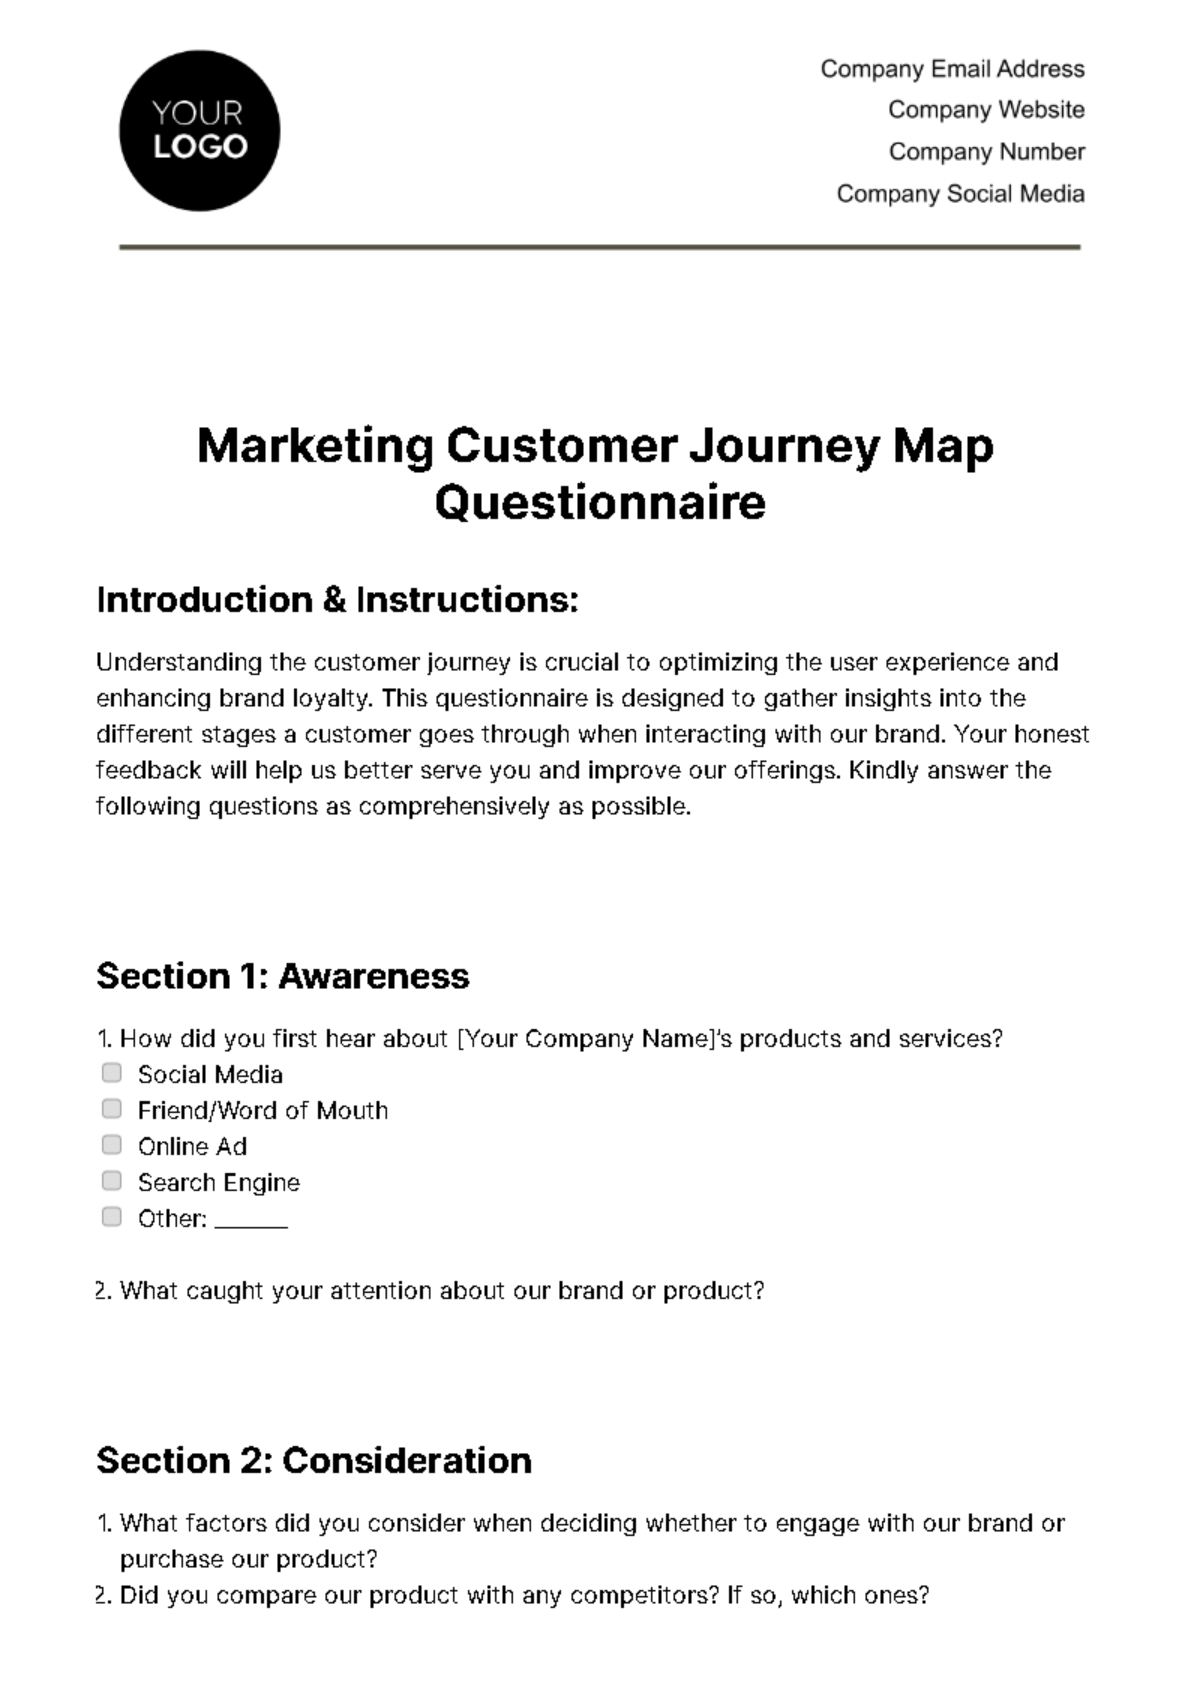 Free Marketing Customer Journey Map Questionnaire Template